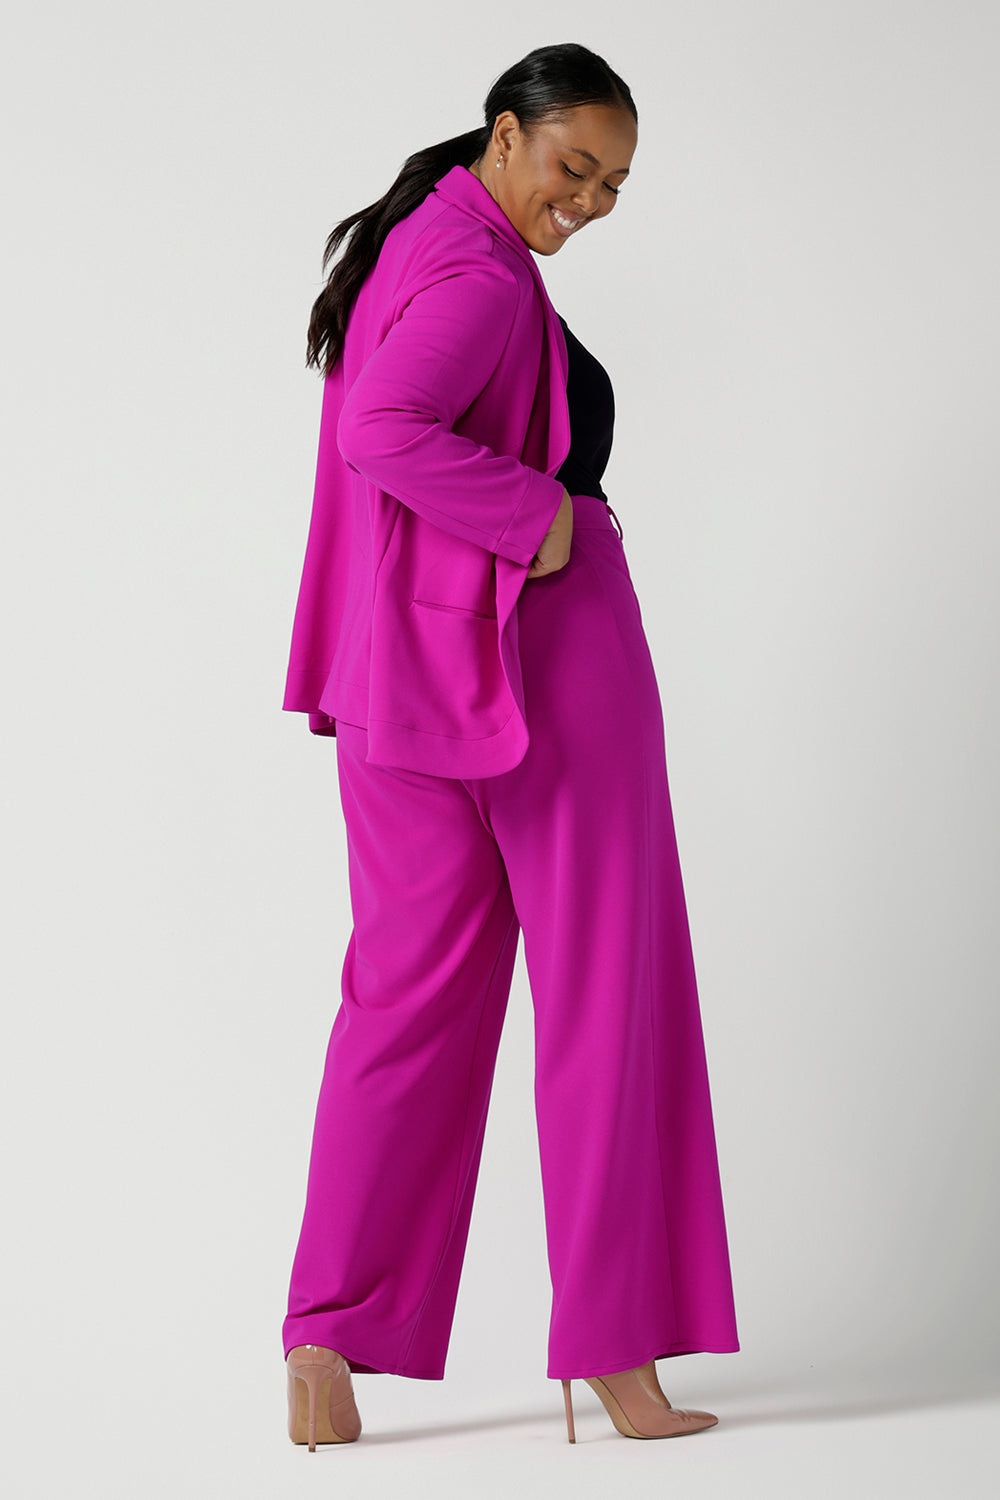 Size 16 woman wears a fuchsia Merit Blazer in scuba crepe. Tailored design with self covered buttons, shawl collar and curved hem and pockets. Size inclusive for stylish corporate workwear for women. Size 8 - 24.